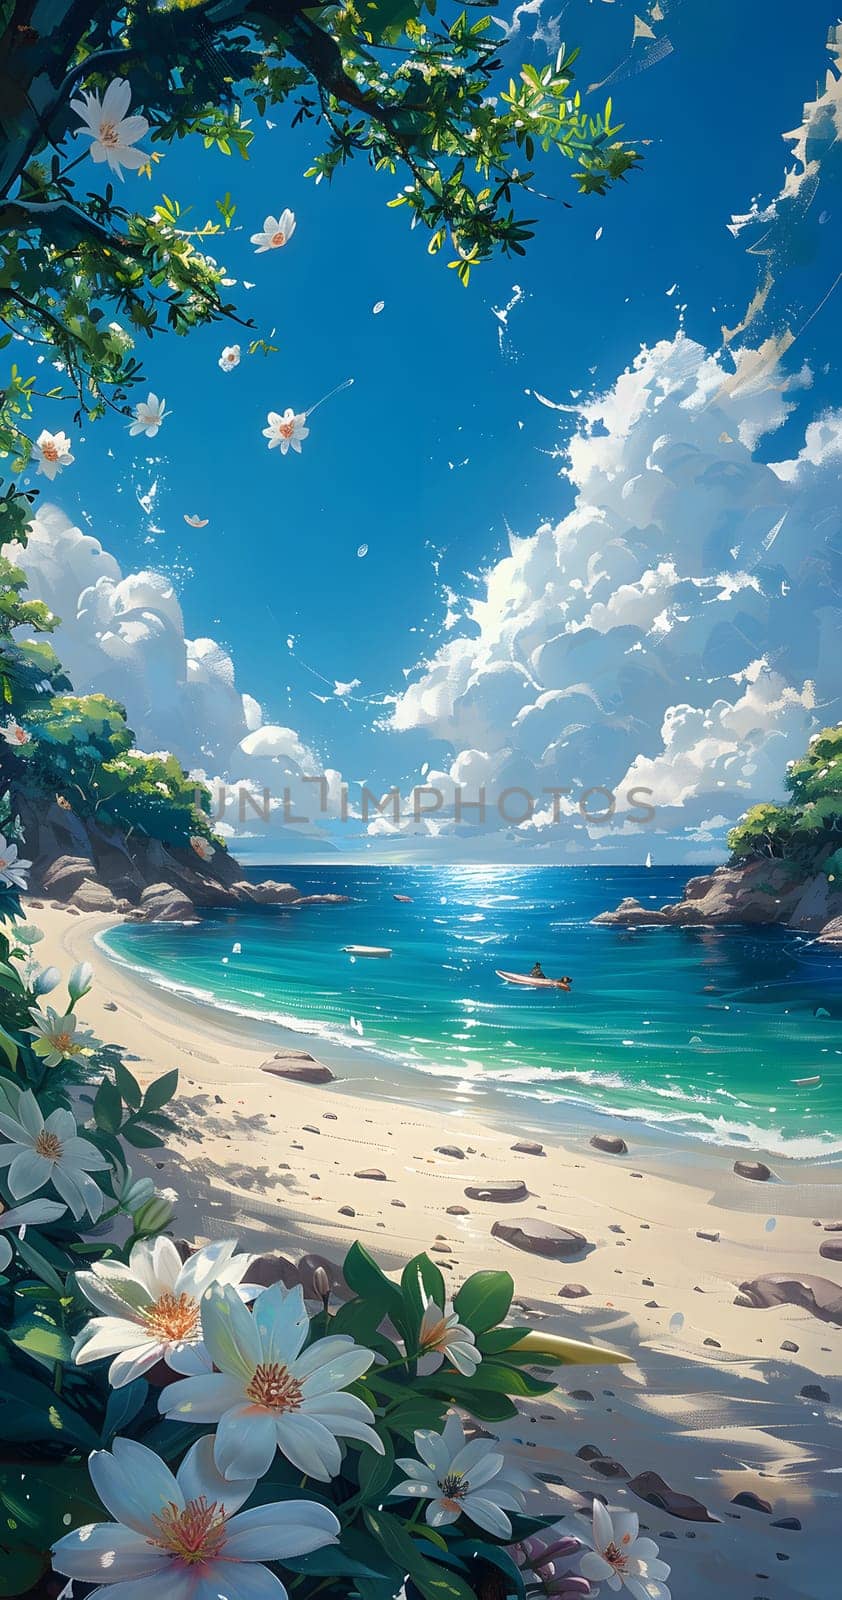 A picturesque natural landscape painting featuring flowers on the beach, azure sky, fluffy clouds, and the tranquil ocean in the background